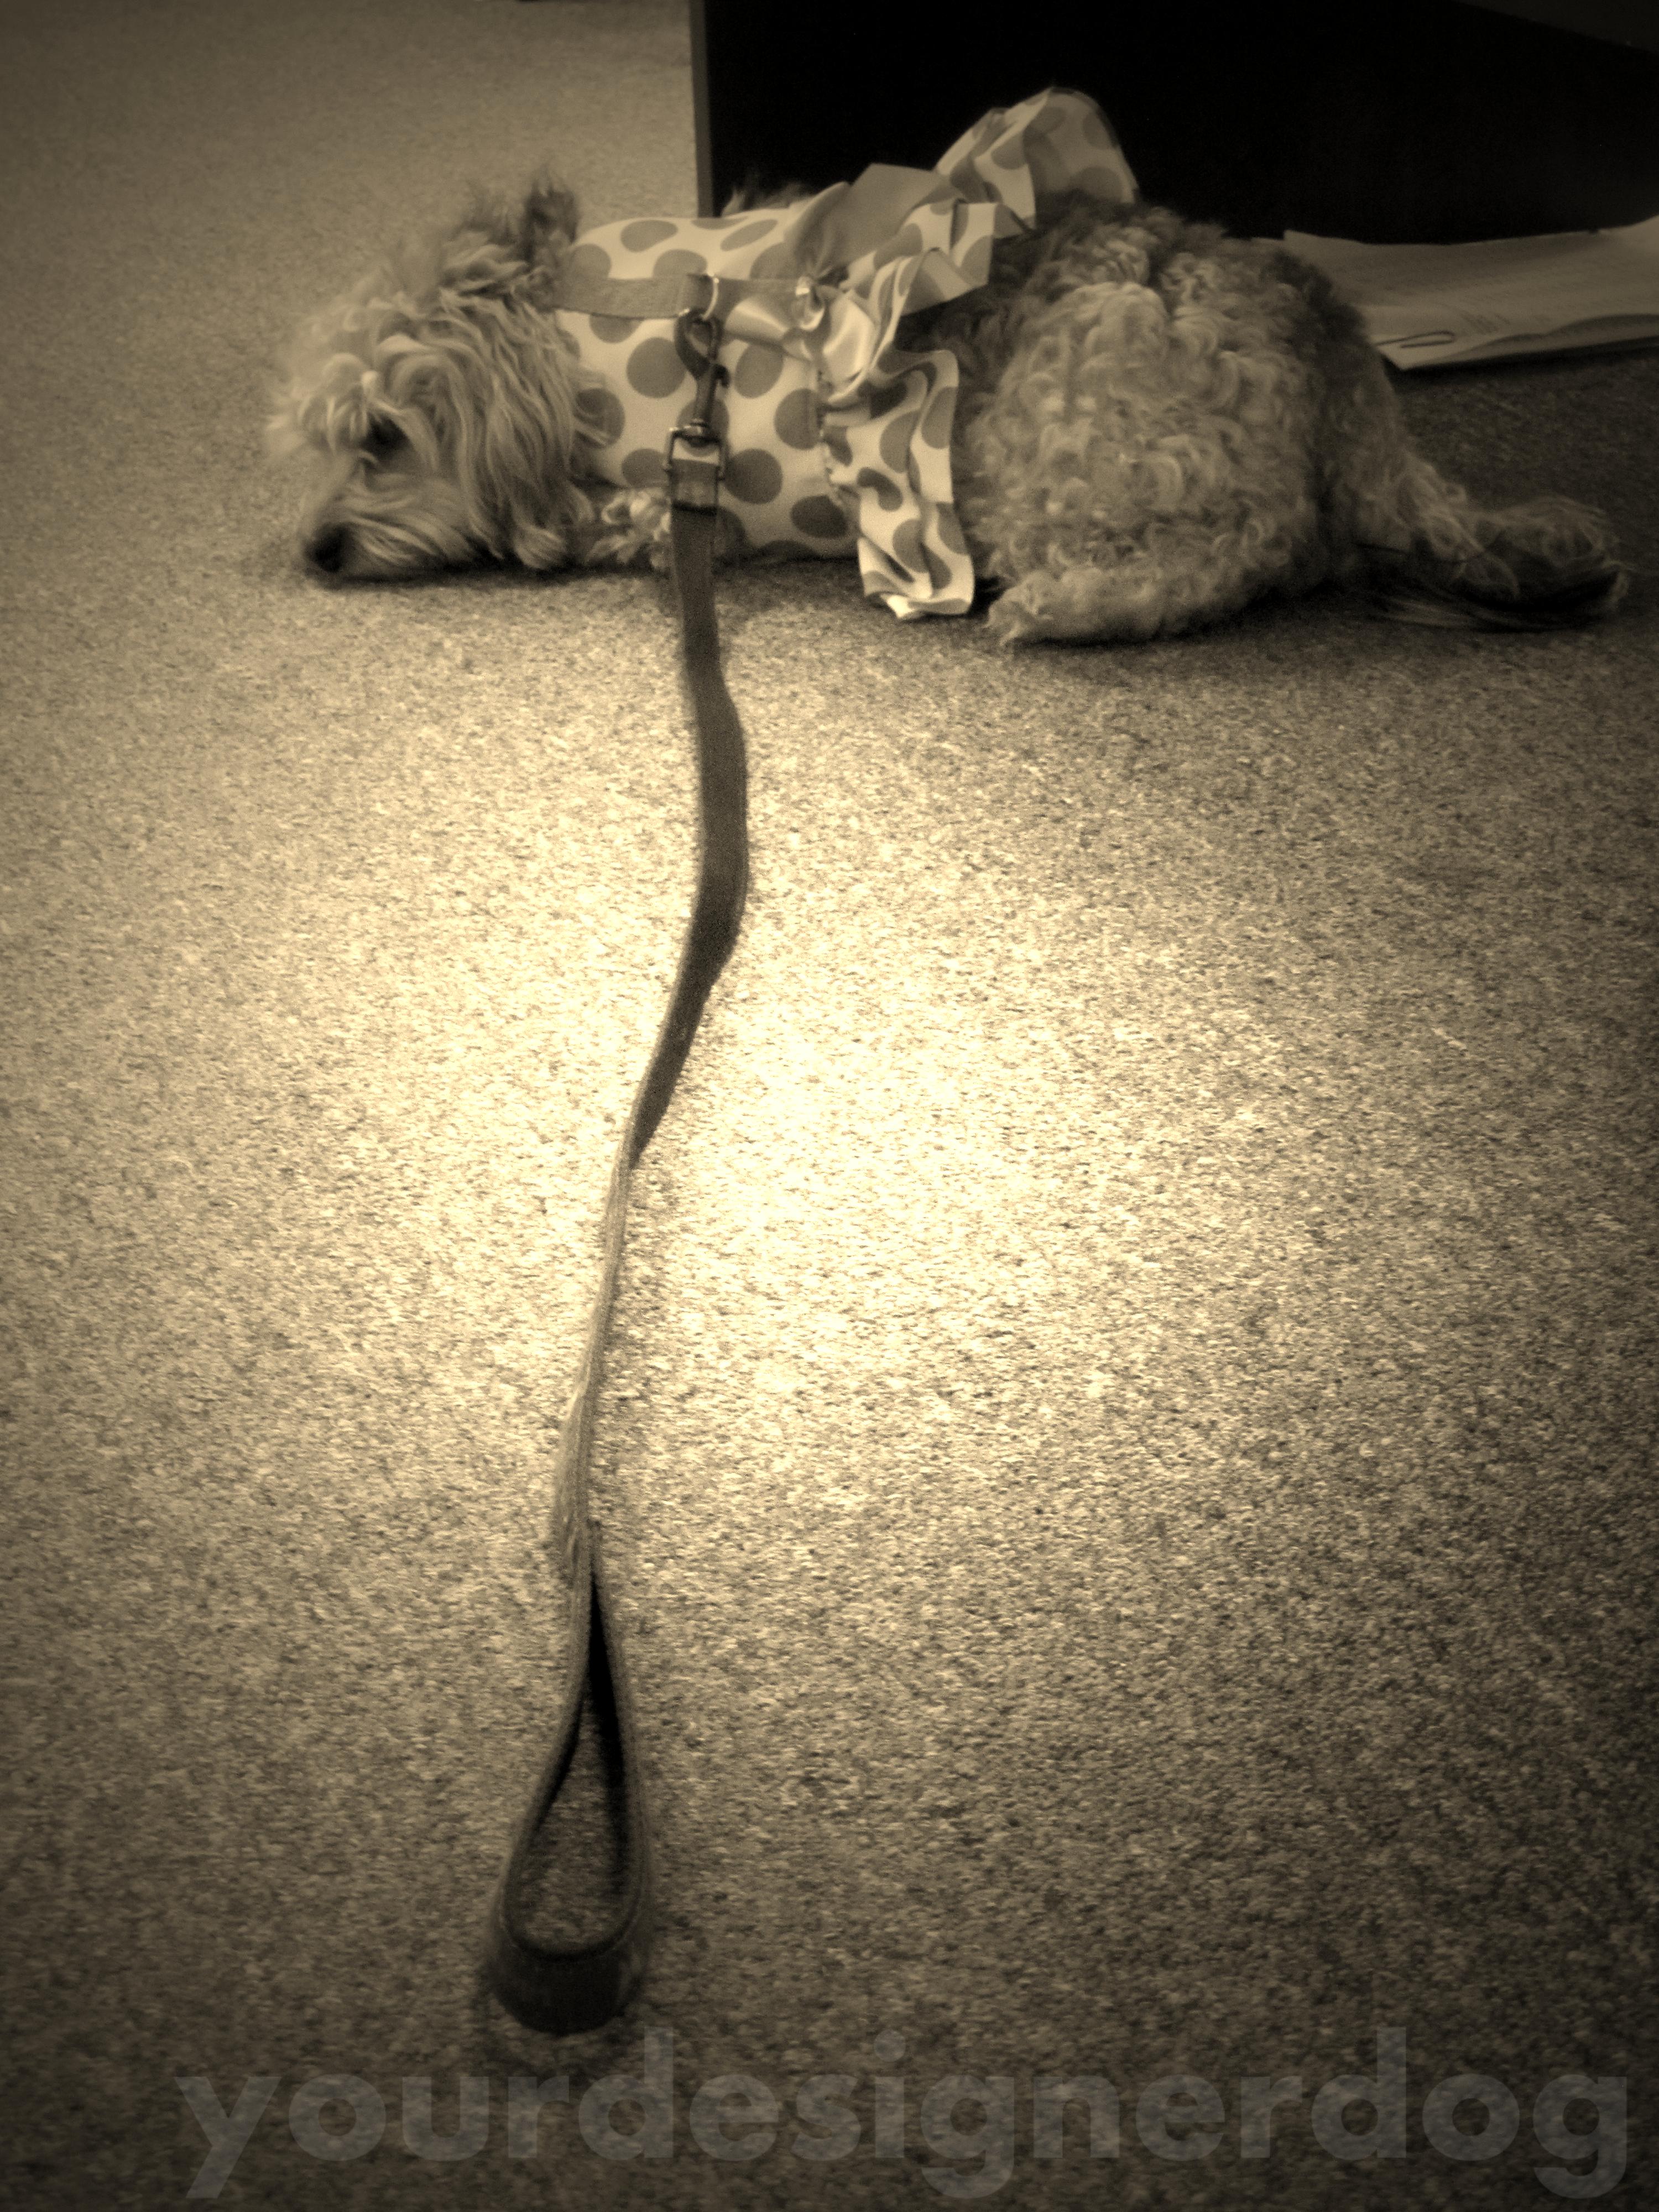 dogs, designer dogs, yorkipoo, yorkie poo, sepia photography, dogs waiting for thier masters, dogs at work